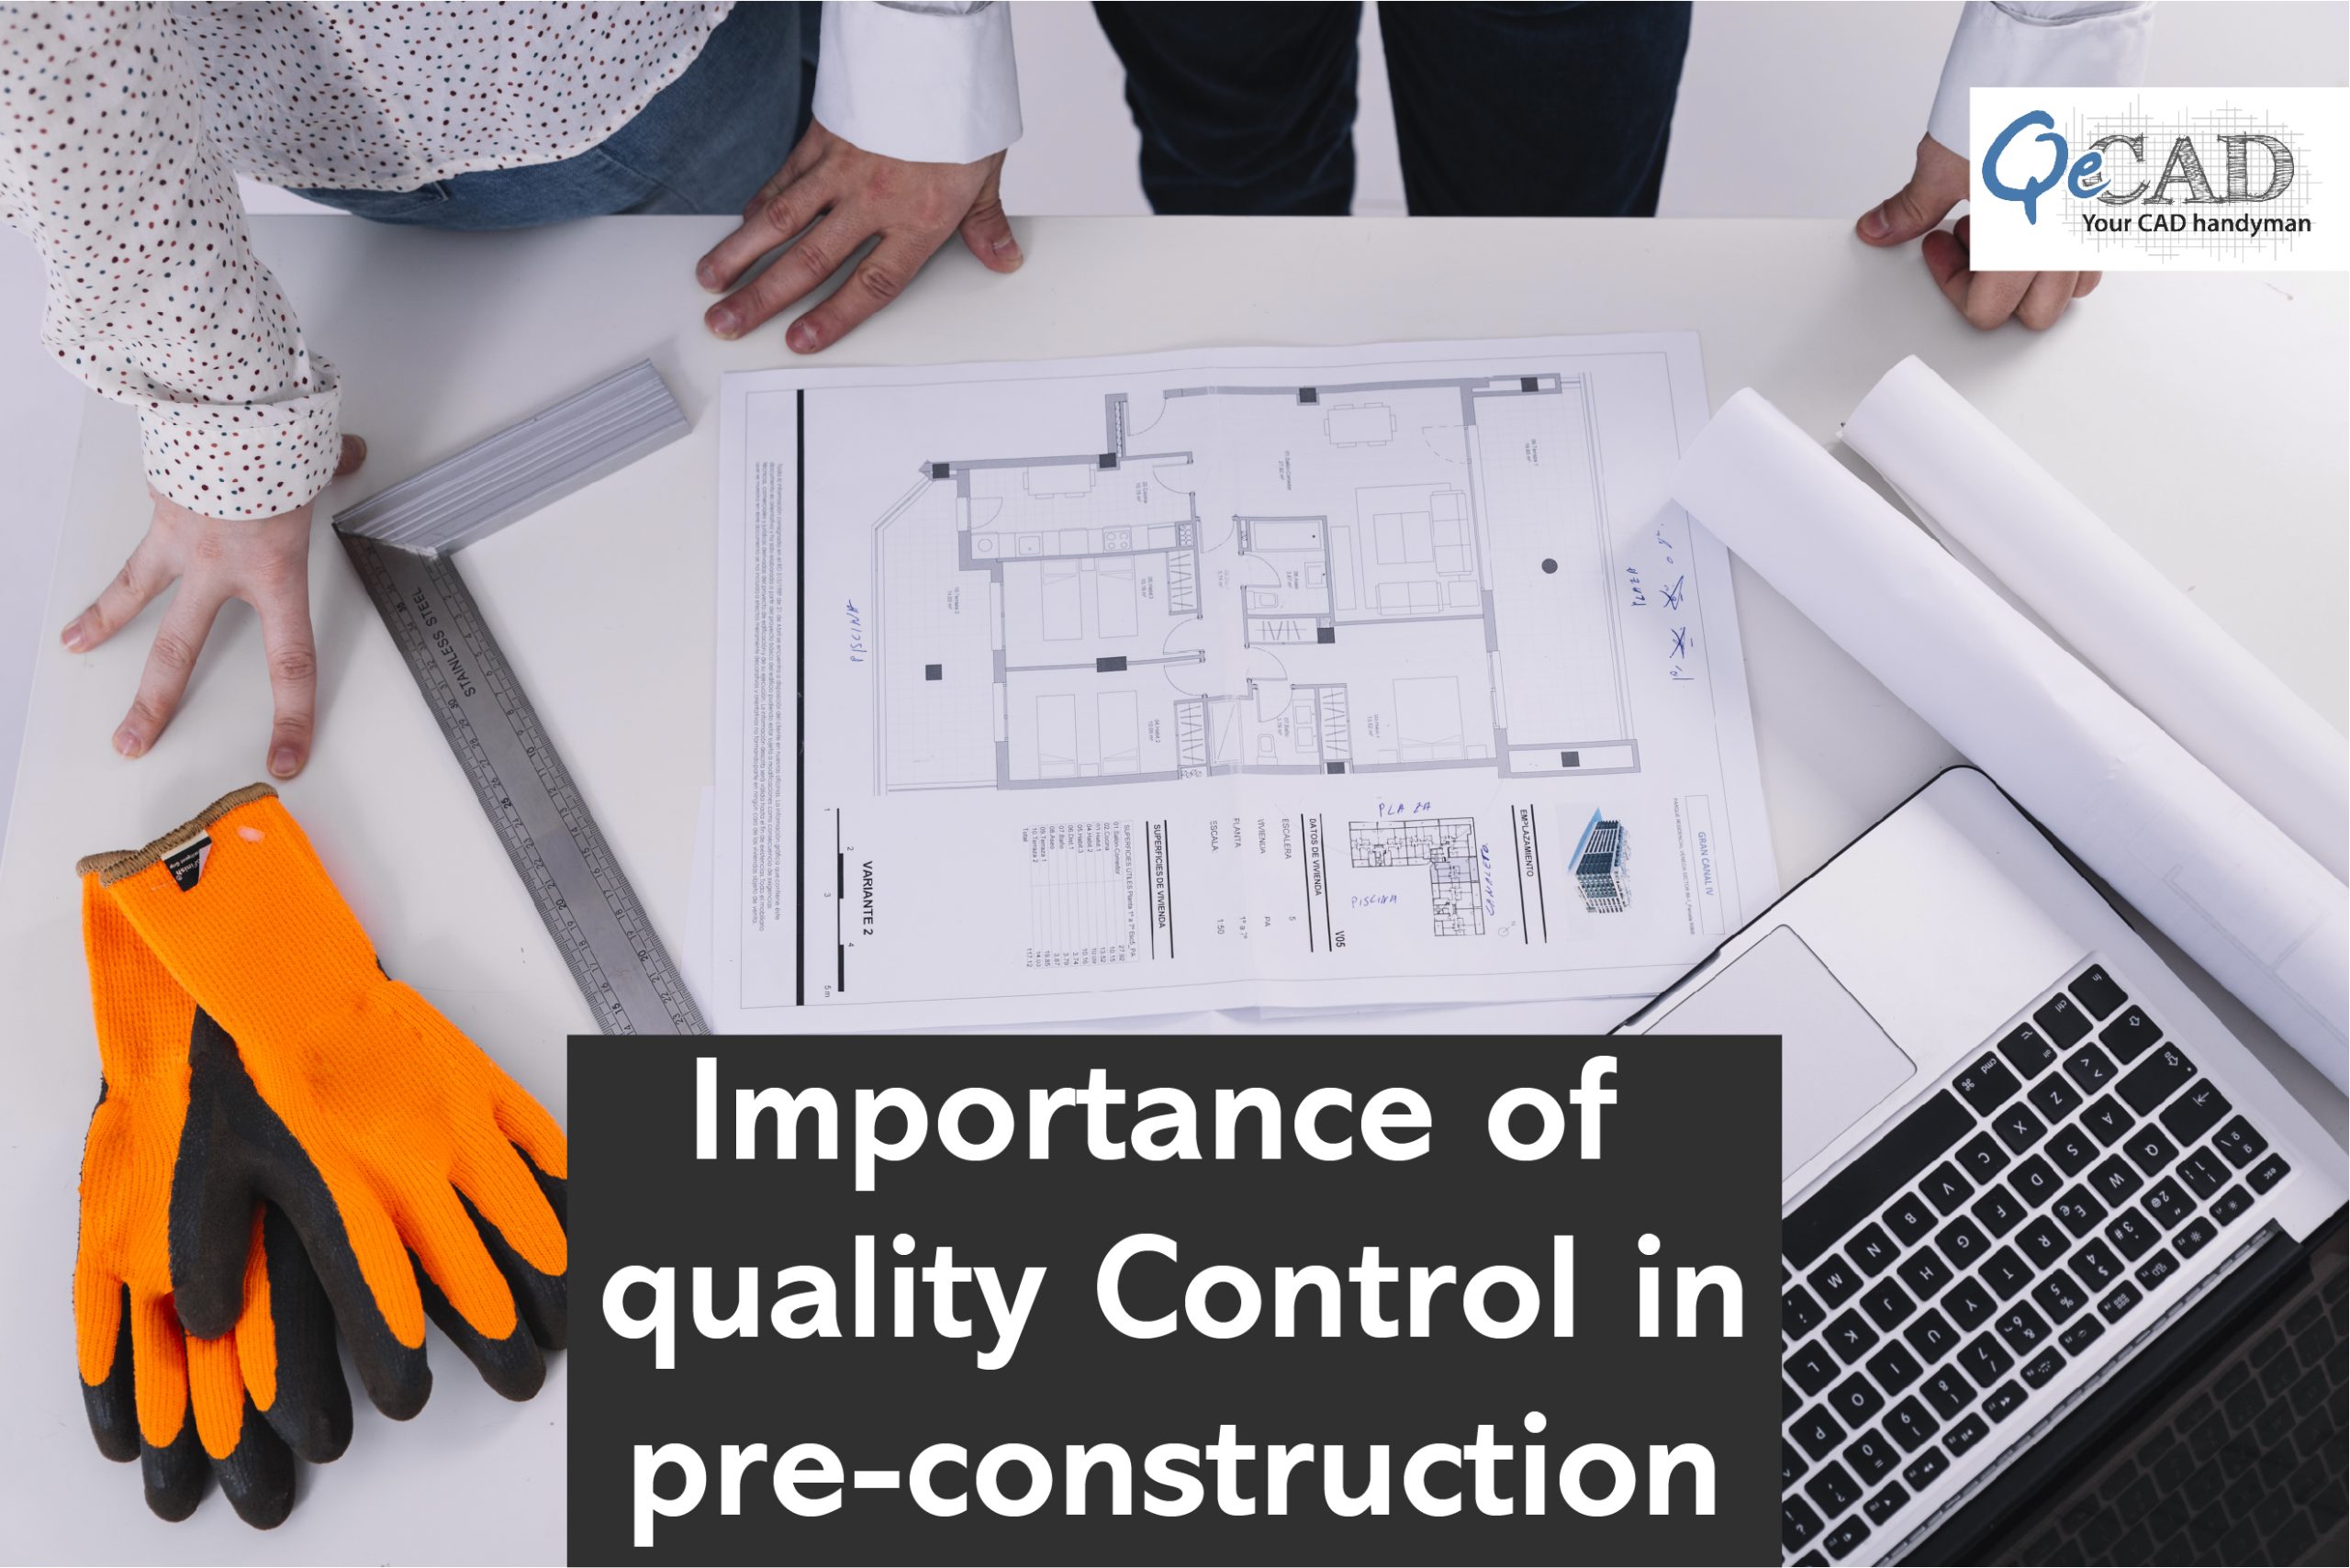 Importance of quality control in pre-construction